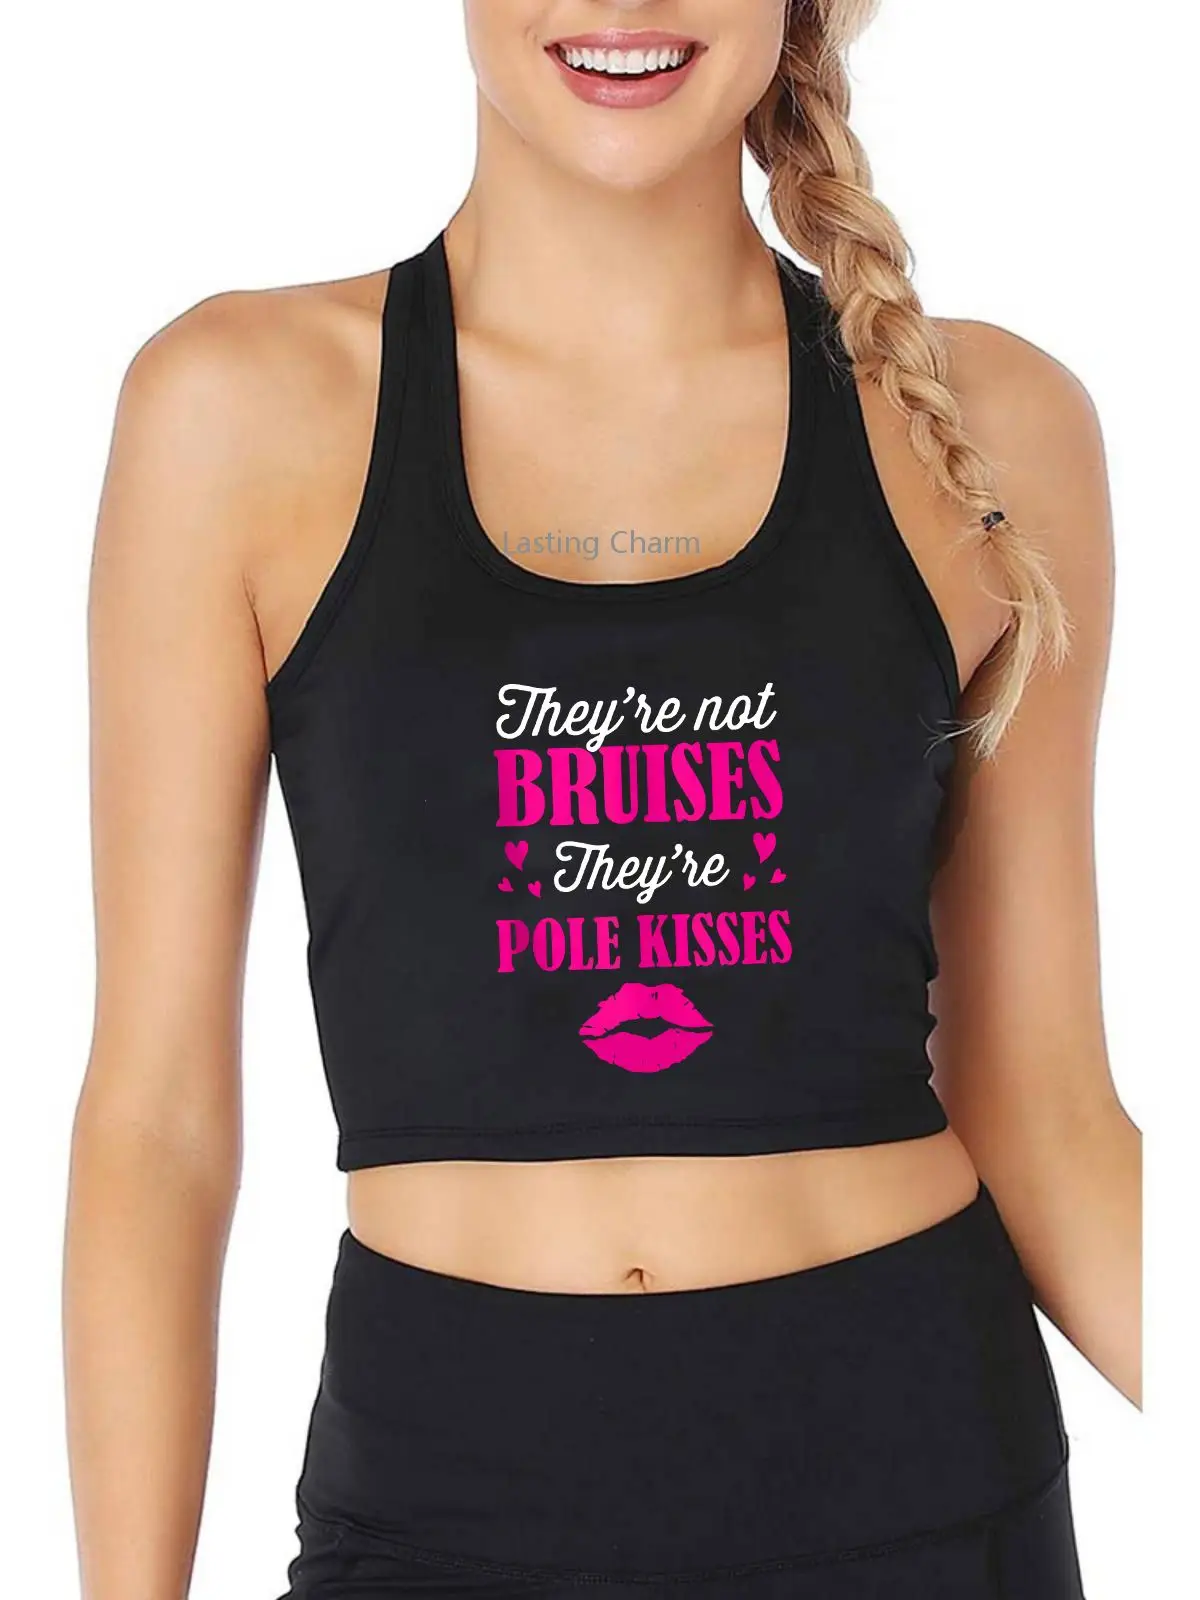 

They're Not Bruises They're Pole Kisses Printed Tank Tops Pole Dancer Funny Sexy Fitness Crop Top Pole Dance Workout Camisole